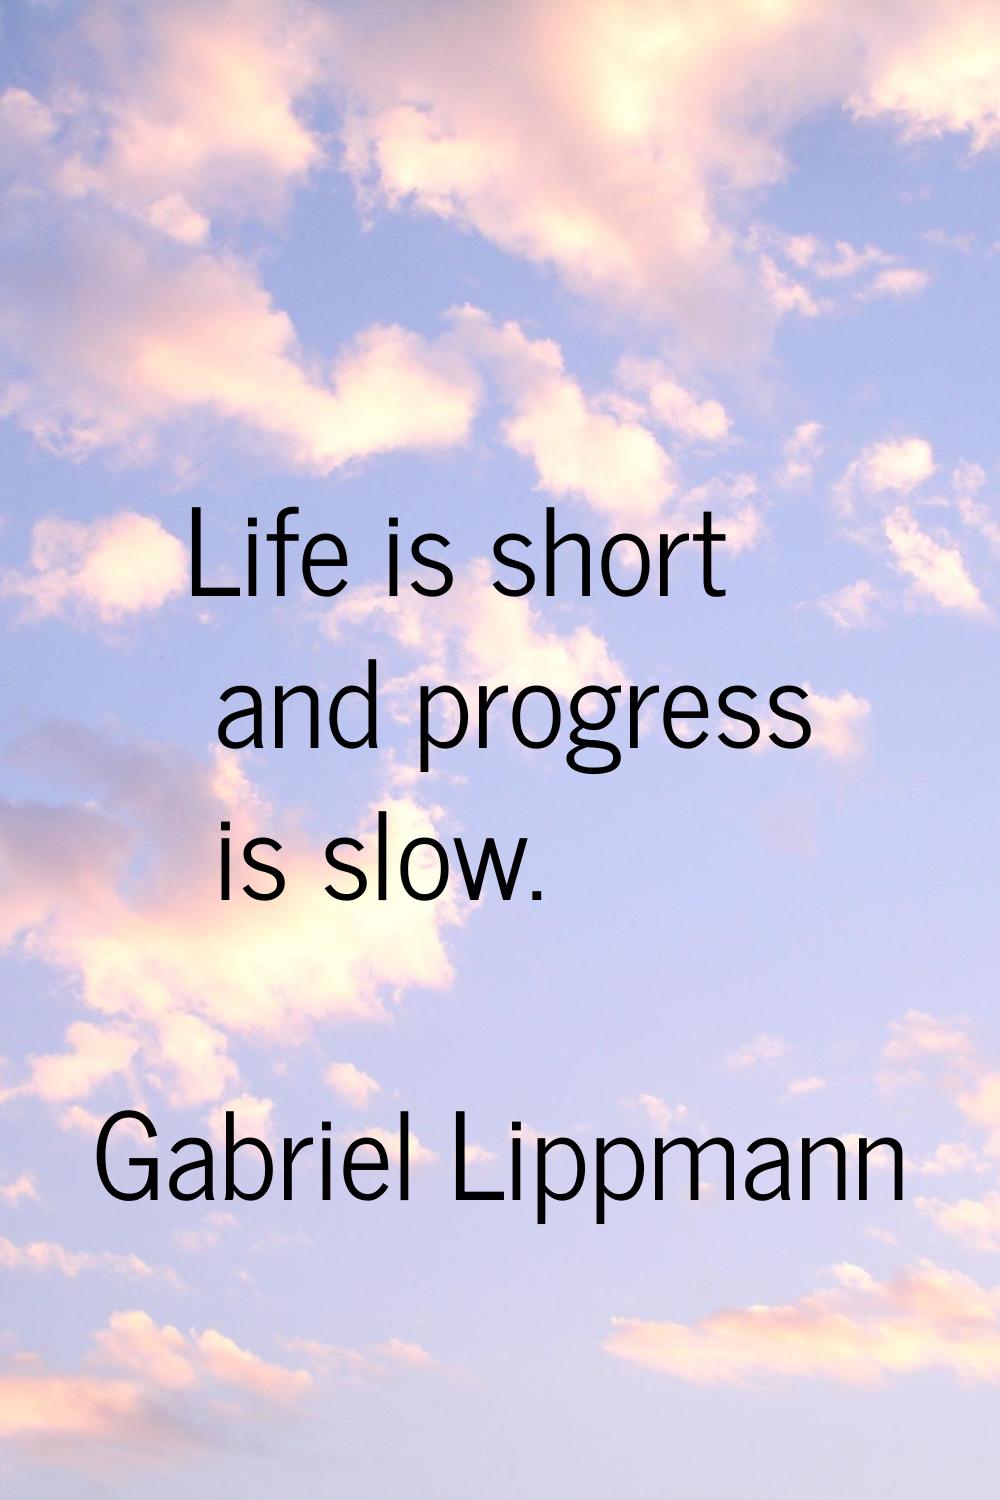 Life is short and progress is slow.